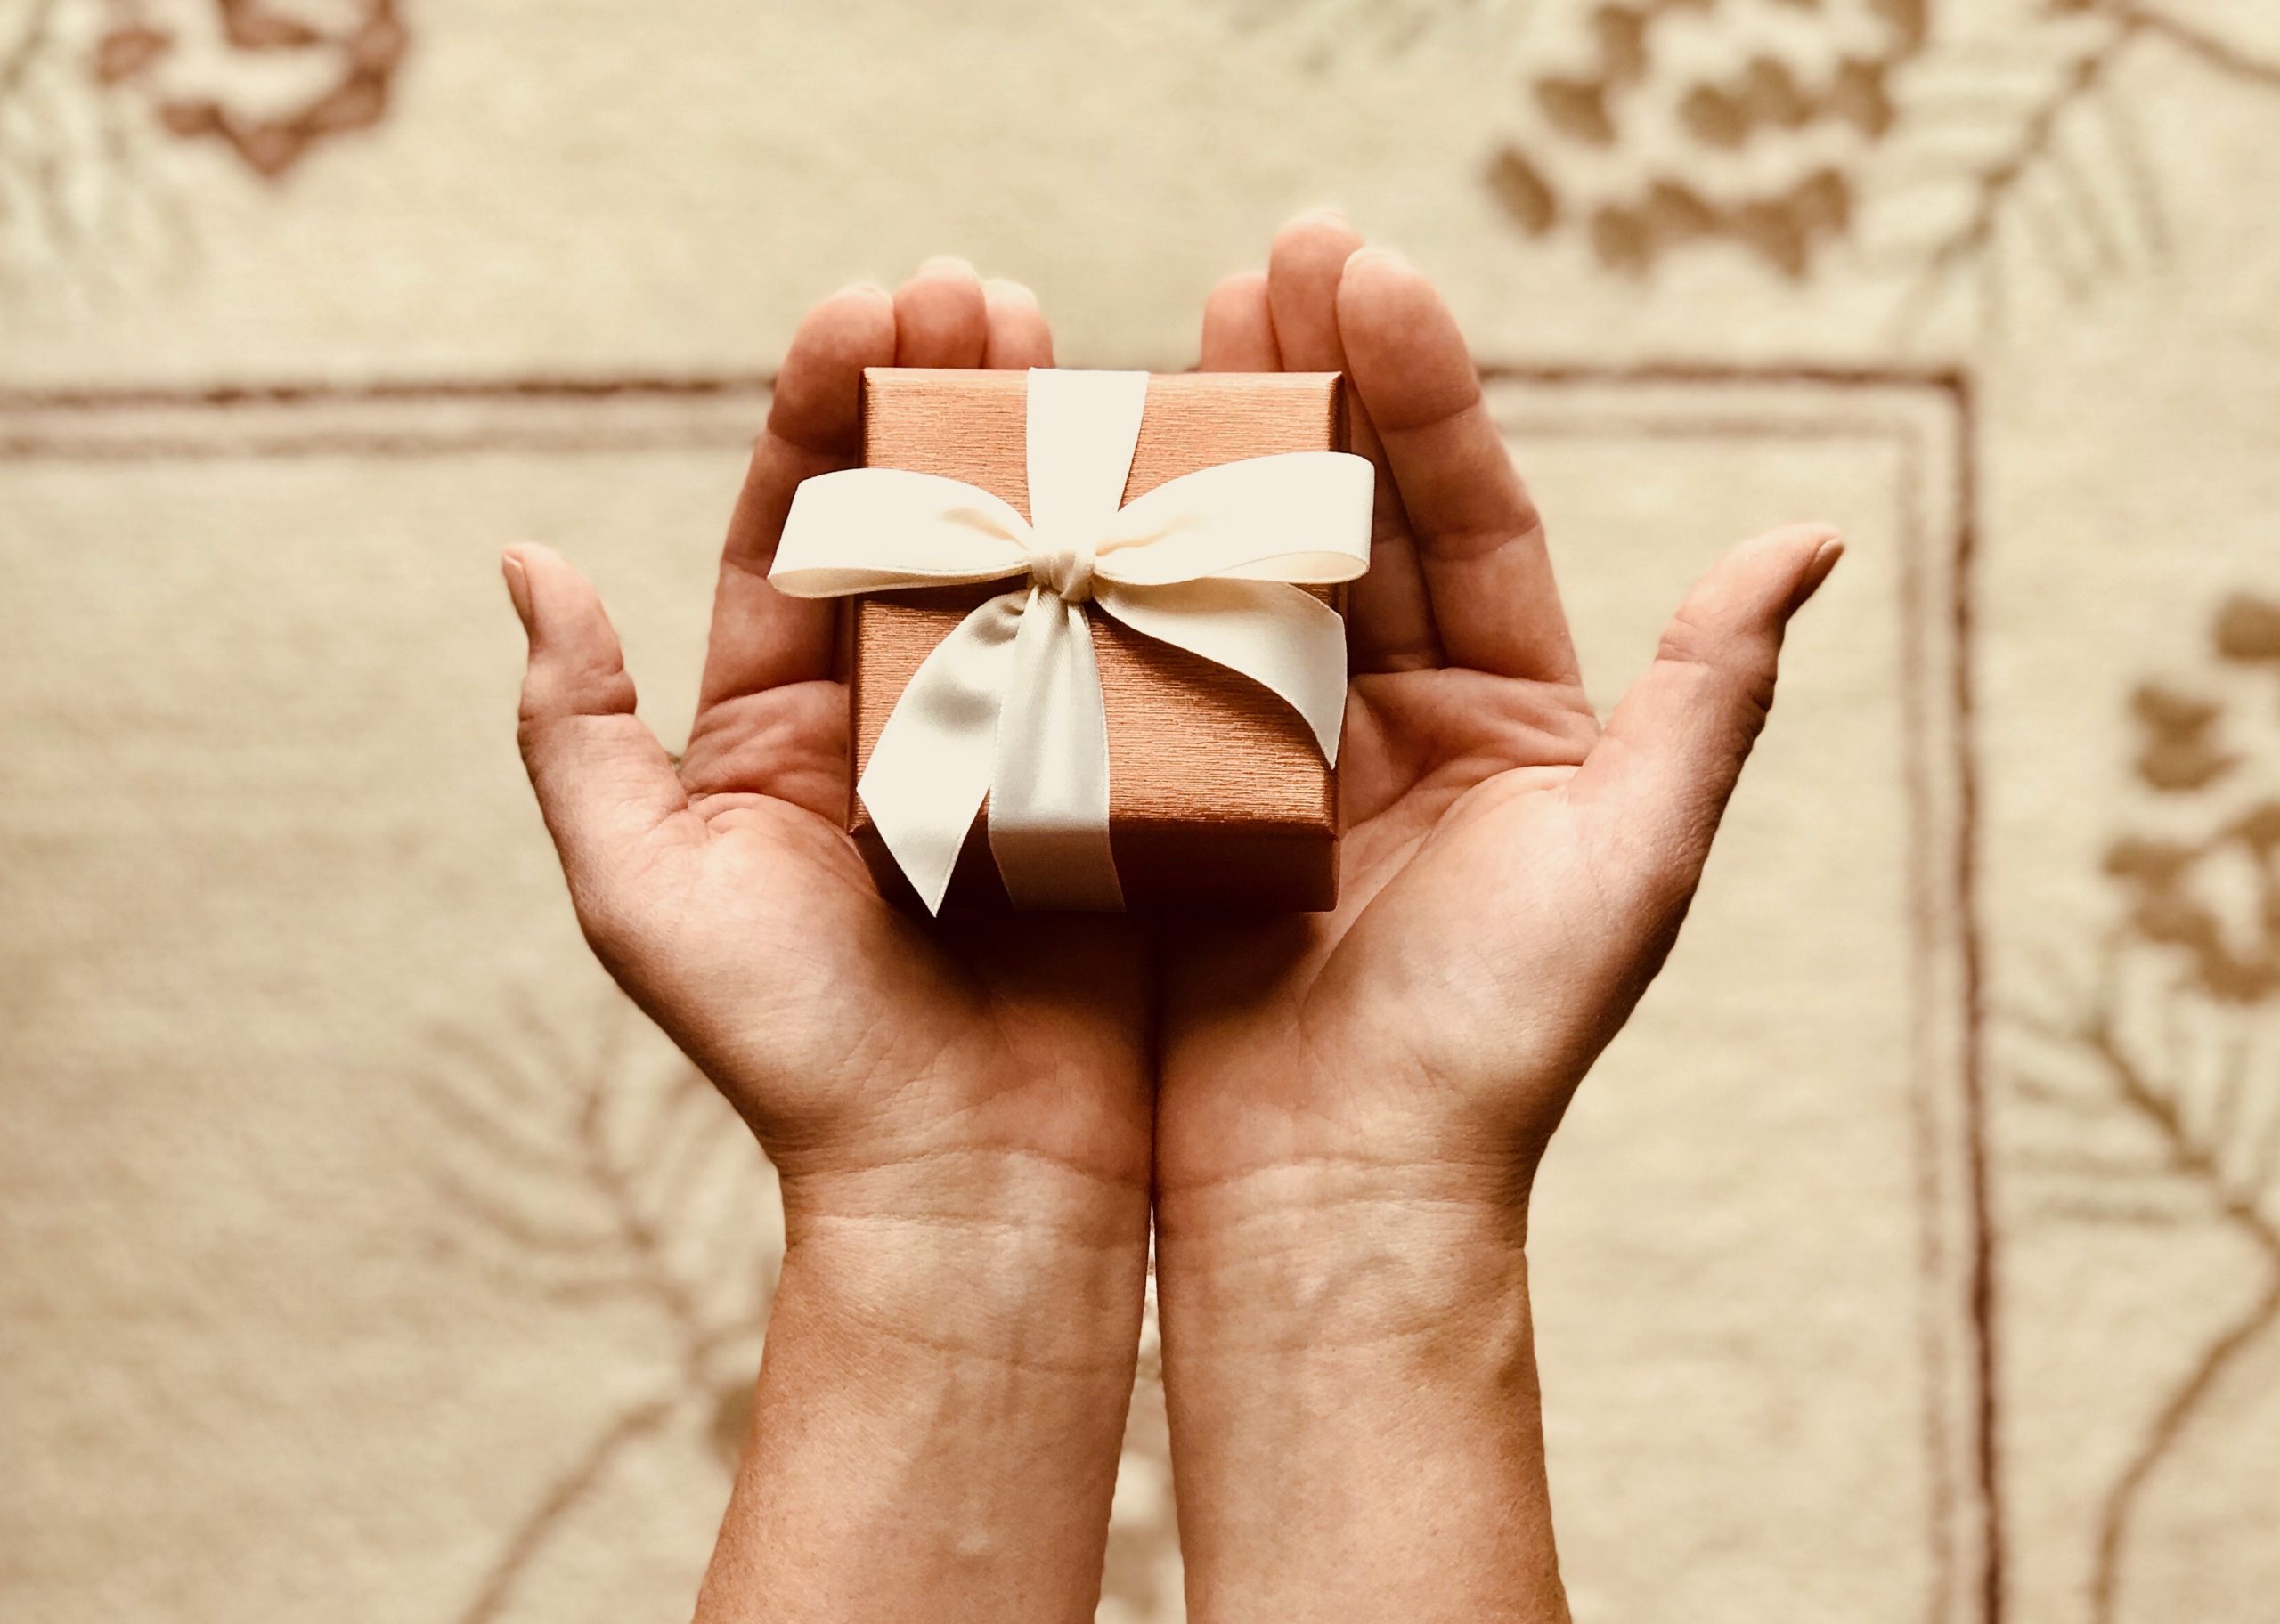 Tips for Buying the Perfect Present